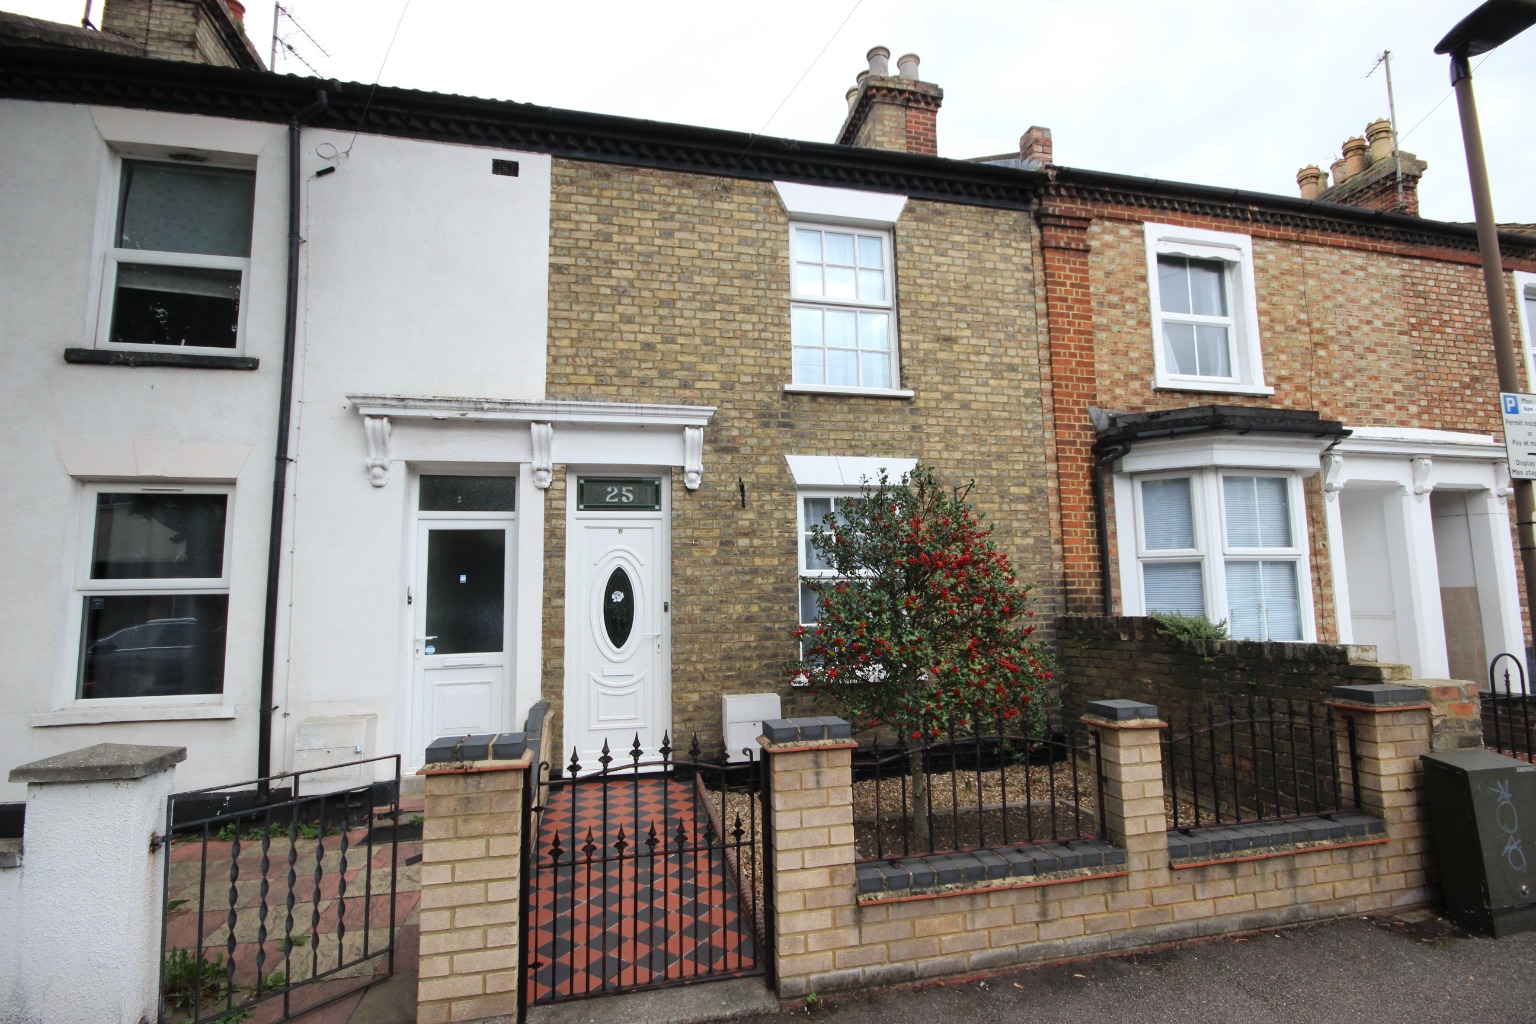 3 bed terraced house to rent in Brereton Road, Bedford - Property Image 1